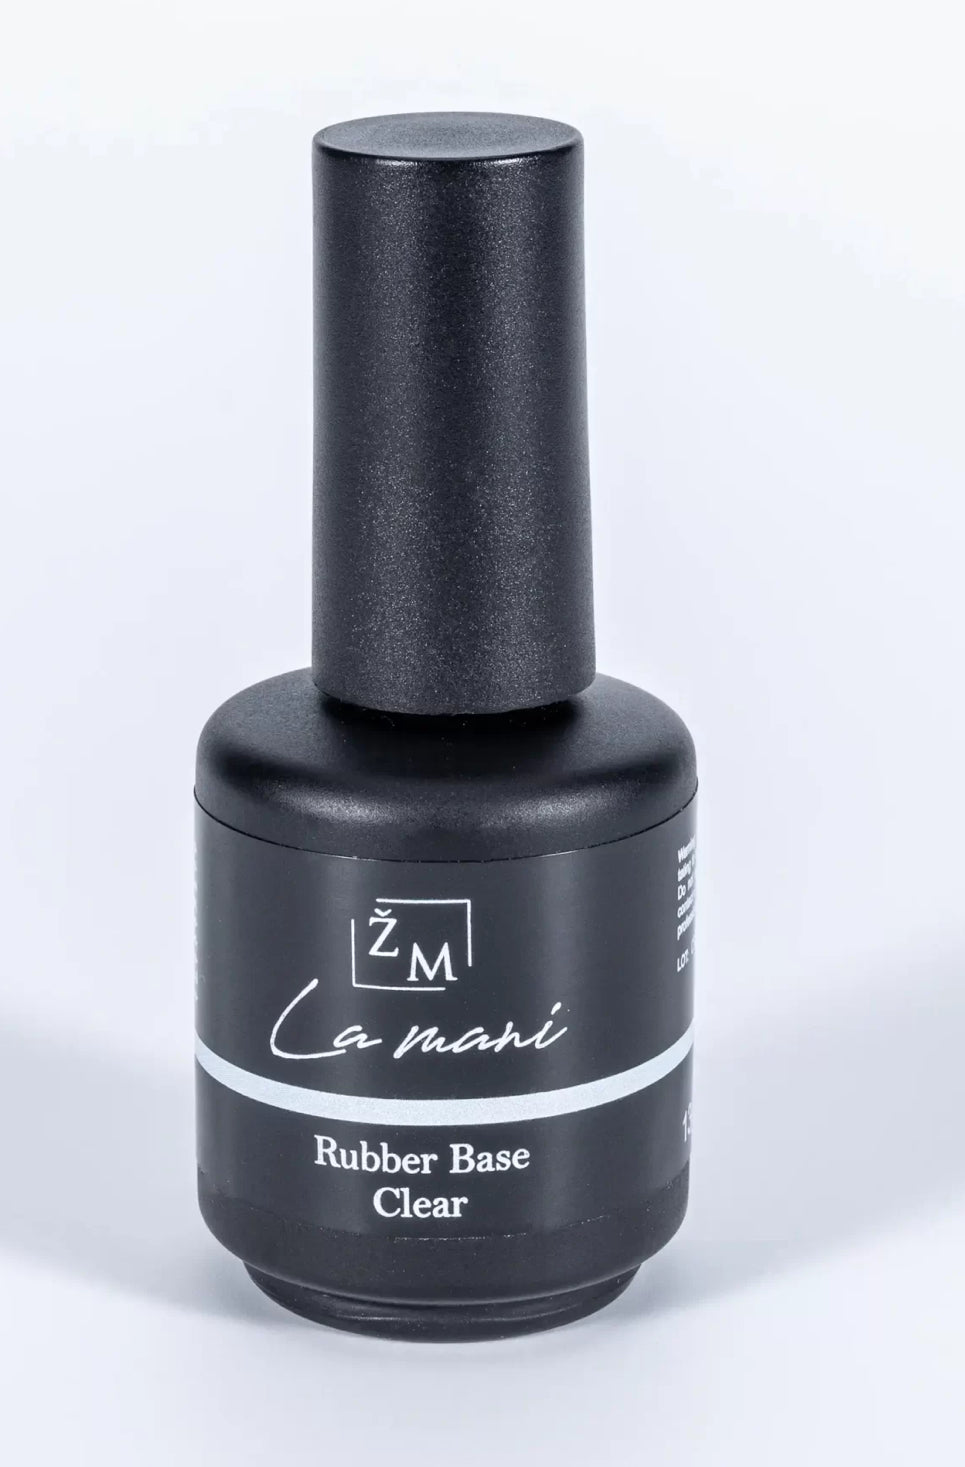 Rubber Base Clear